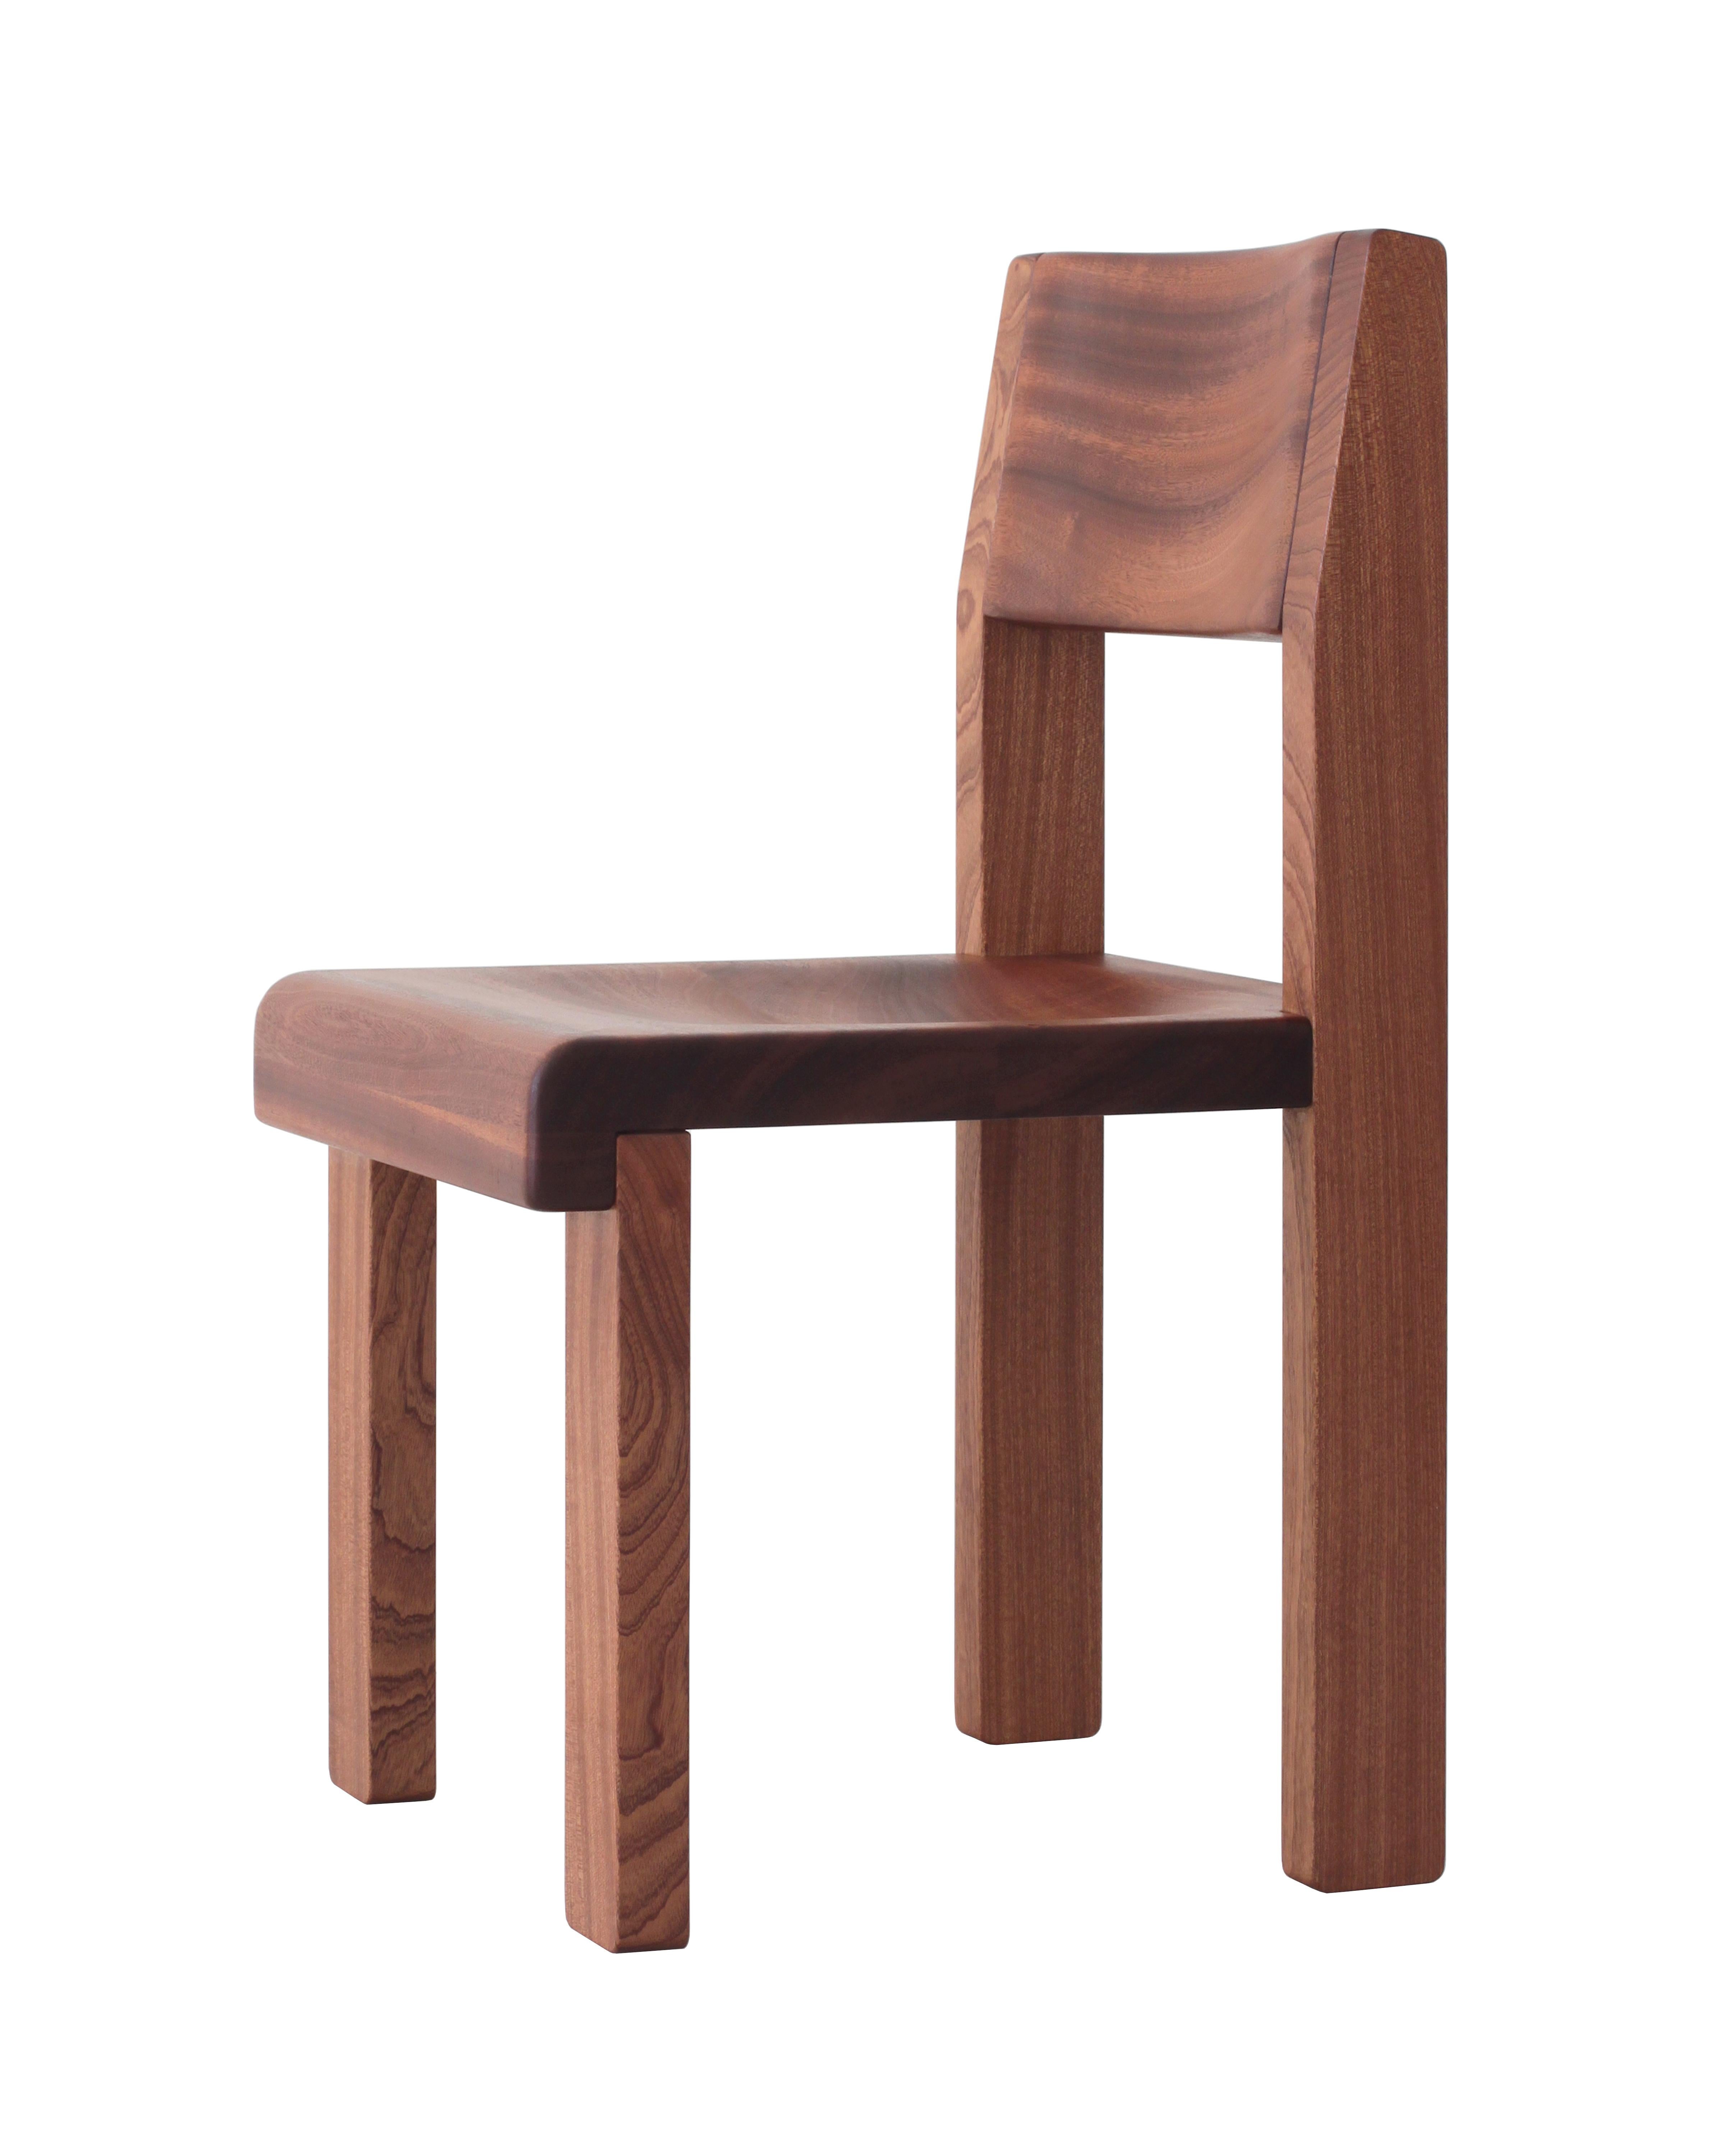 Oliver chair is made of solid sapele wood with a hand-rubbed oil finish. The design is robust yet simple, with clean lines and soft edges. Thick legs enable sturdy connections, limiting the number of parts needed, and the front and back legs are at